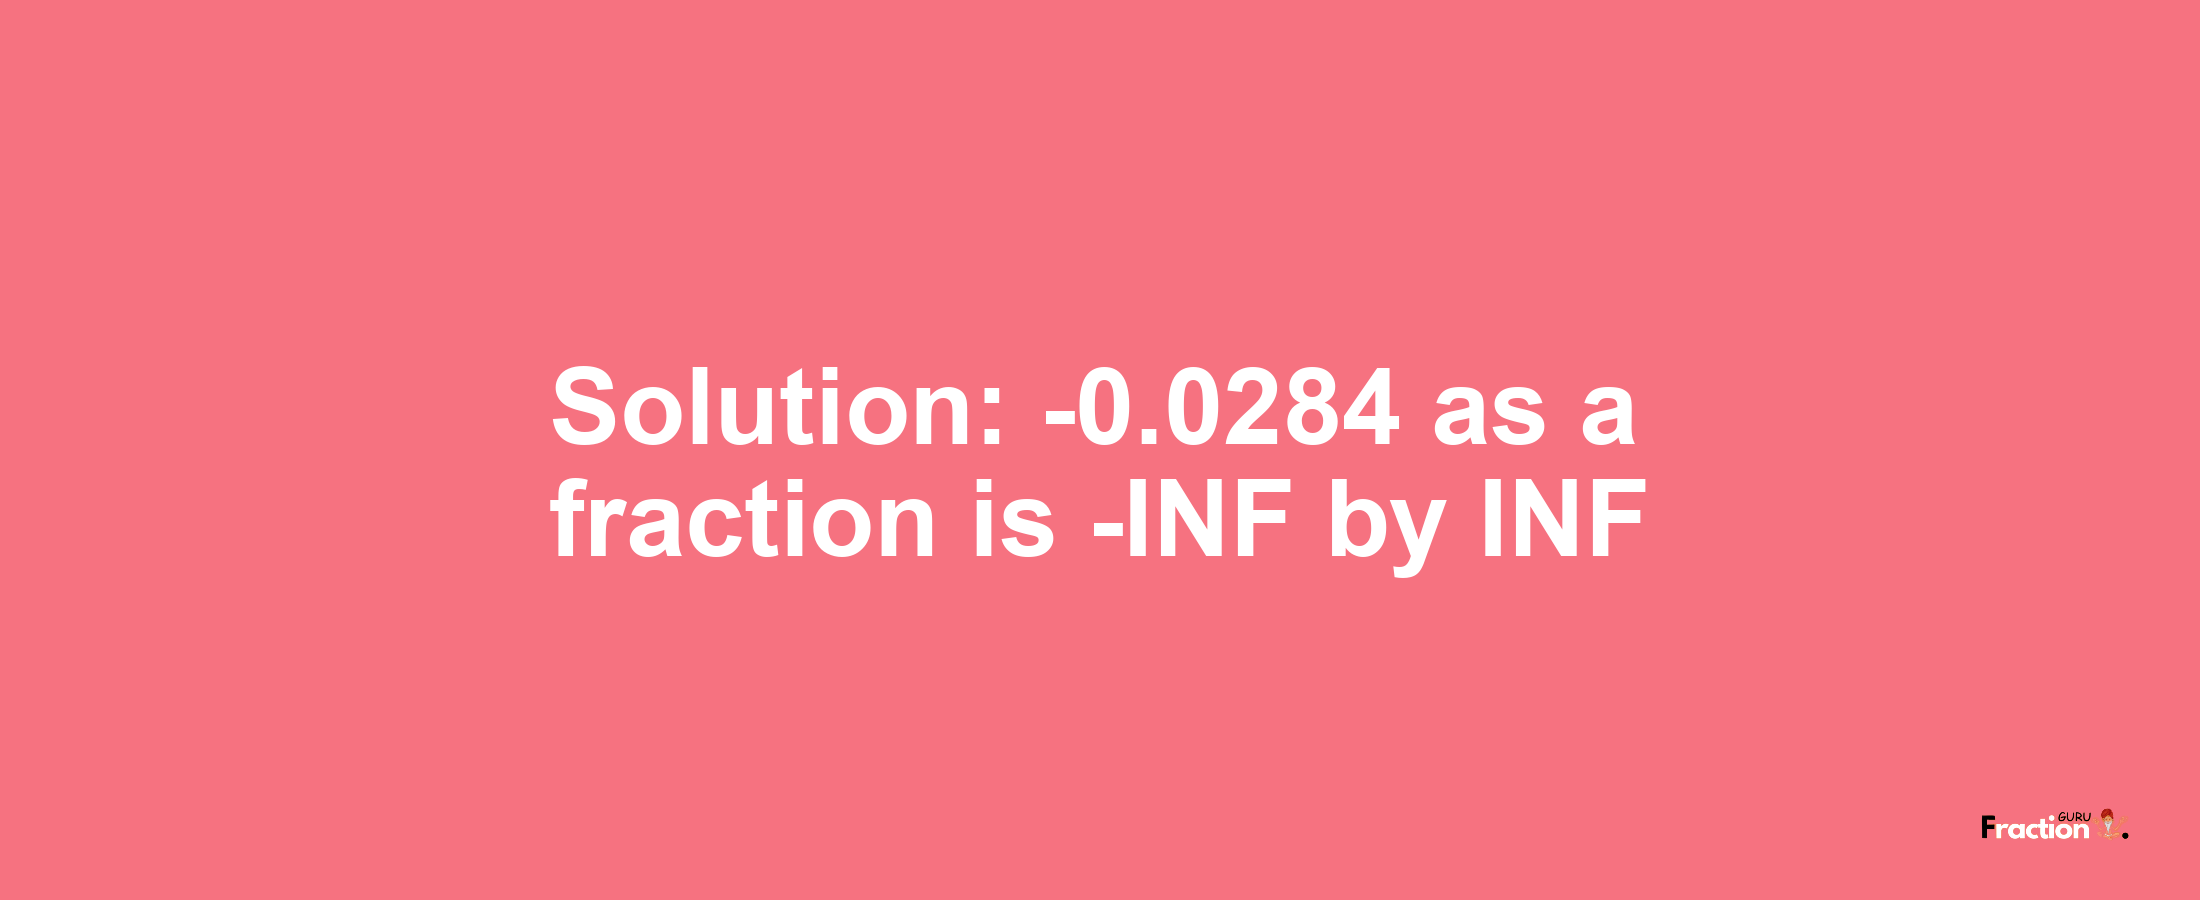 Solution:-0.0284 as a fraction is -INF/INF